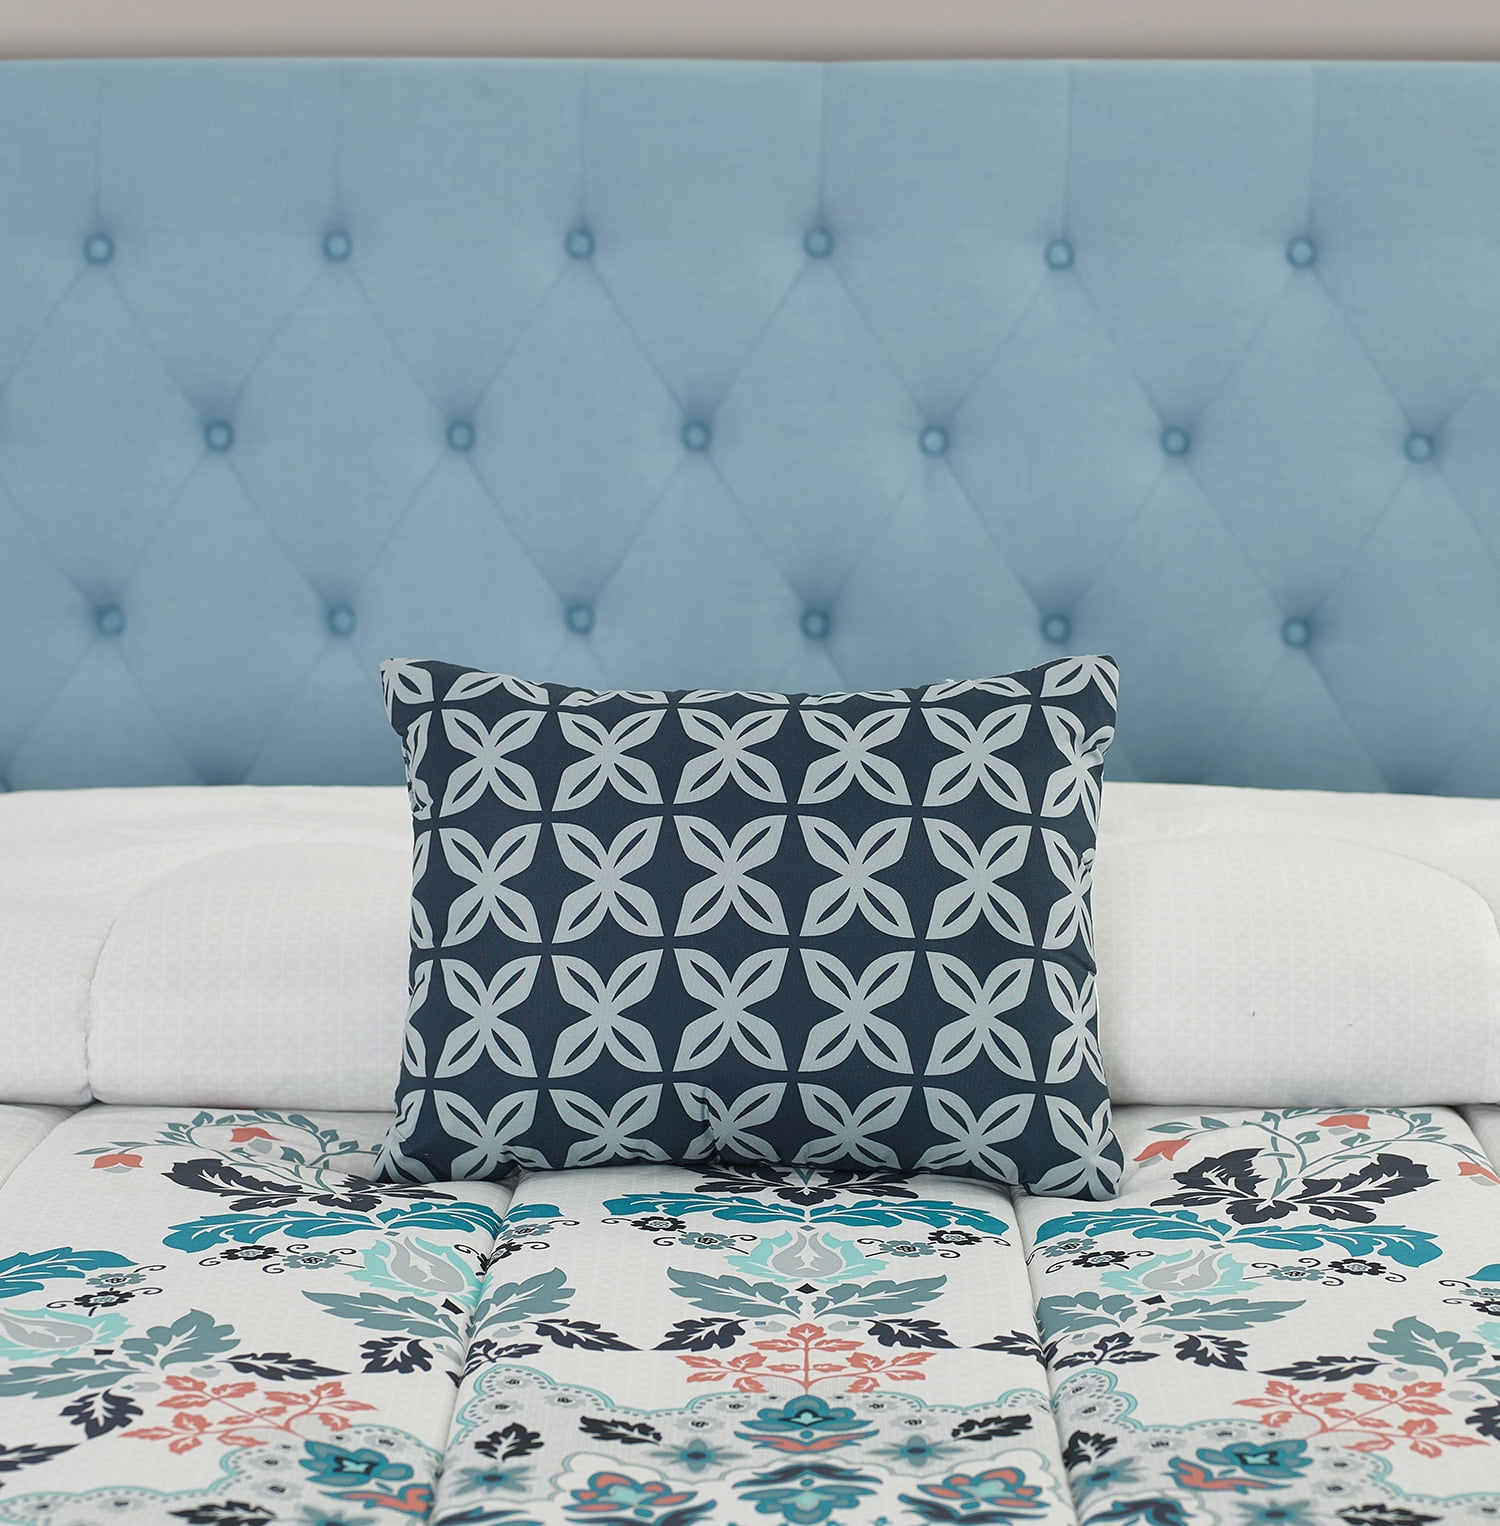 Details about   Teal Medallion 8 Piece Bed Set with Sheets and Decor Pillow Queen